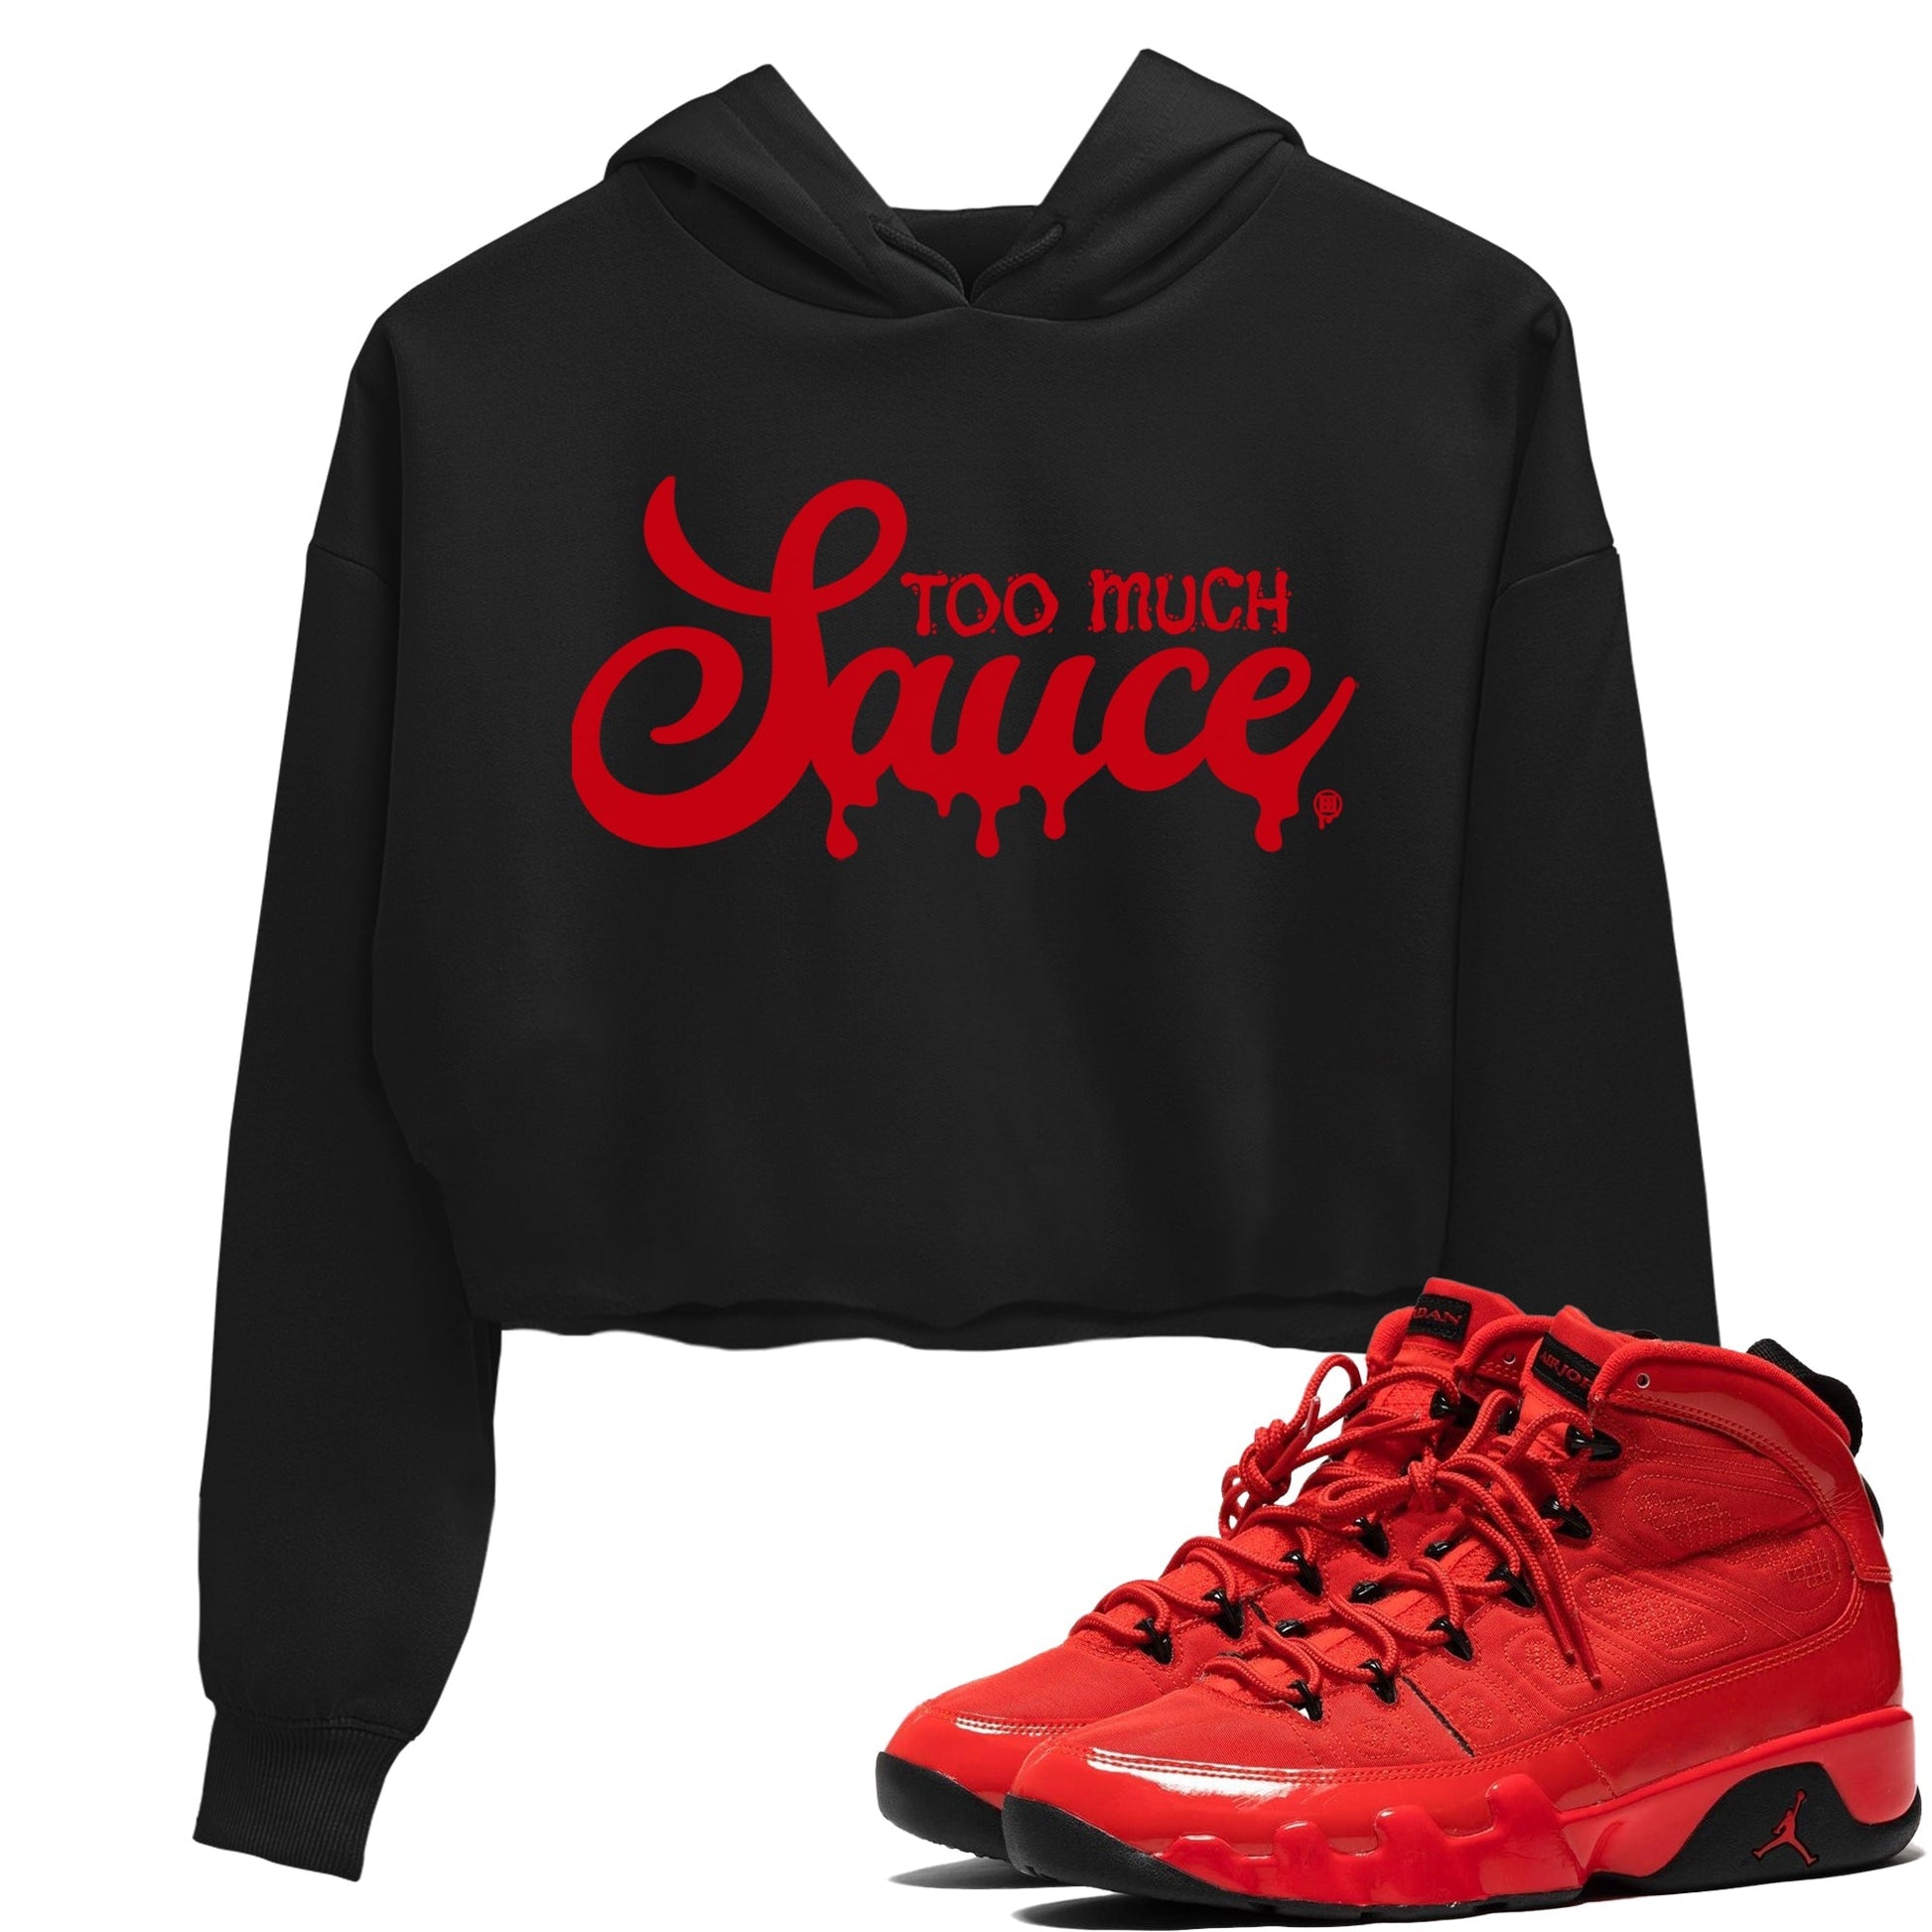 Jordan 9 Chile Red Sneaker Match Tees Too Much Sauce Sneaker Tees Jordan 9 Chile Red Sneaker Release Tees Women's Shirts